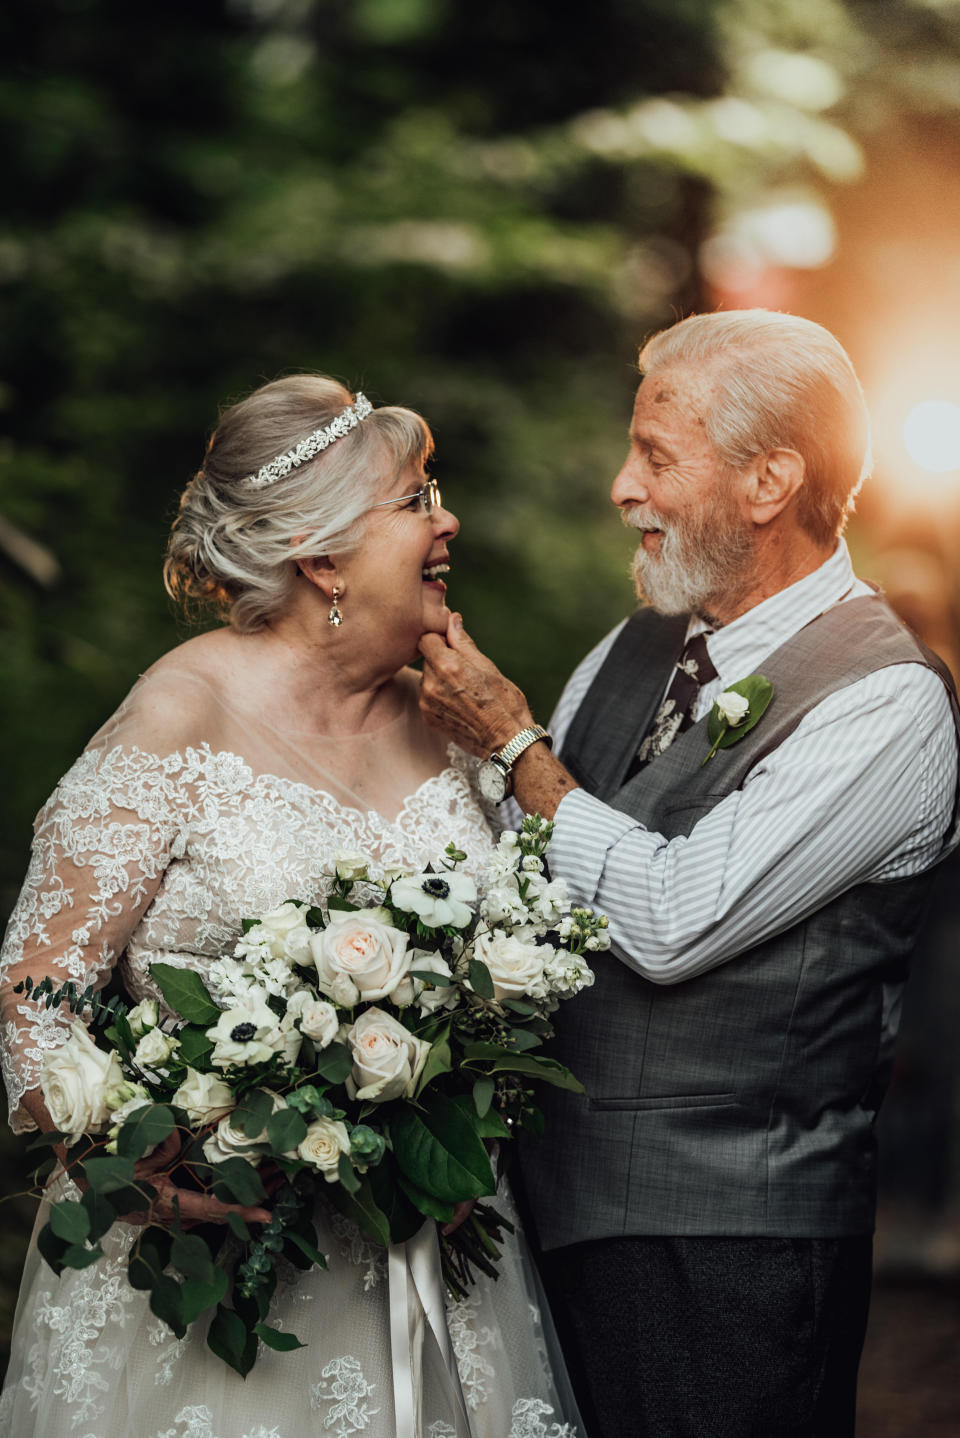 After 60 years of marriage, this couple is still head over heels in love. (Photo: <a href="https://abigailgingeralephotography.com/" target="_blank">Abigail Gingerale Photography</a>)